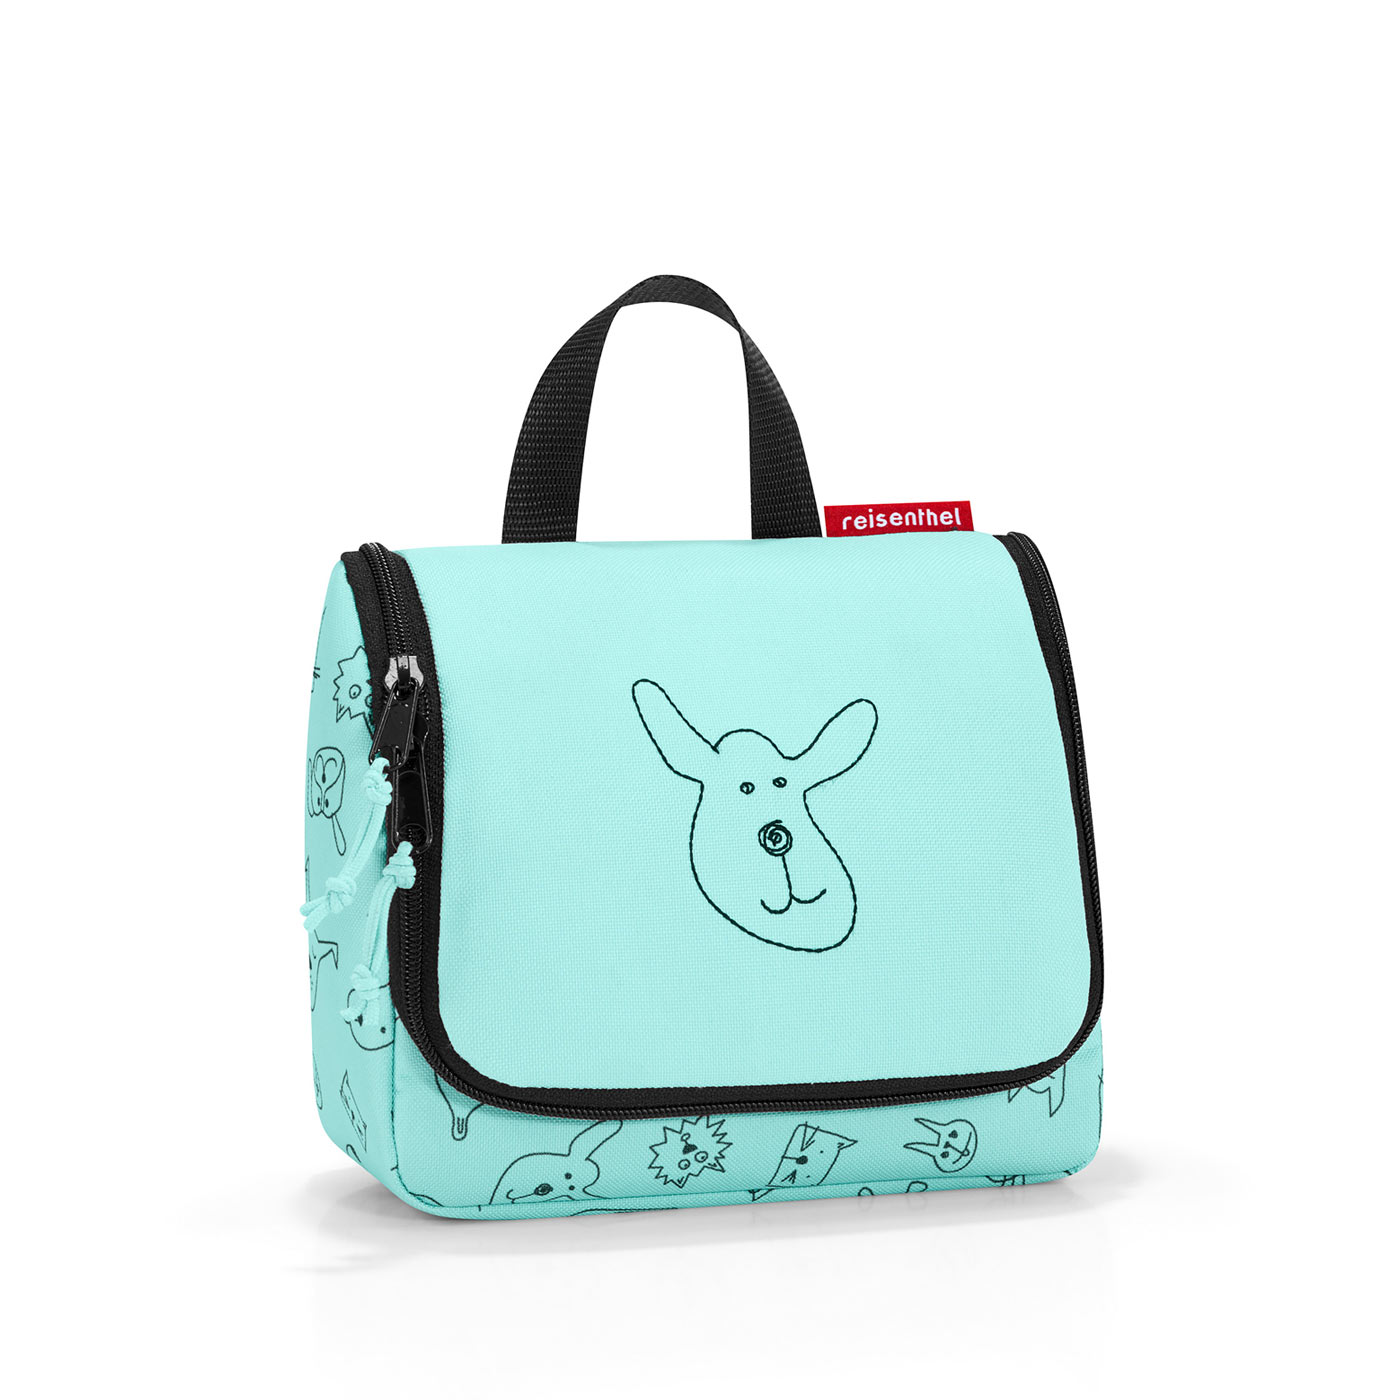 E-shop Reisenthel Toiletbag S Kids Cats and dogs mint